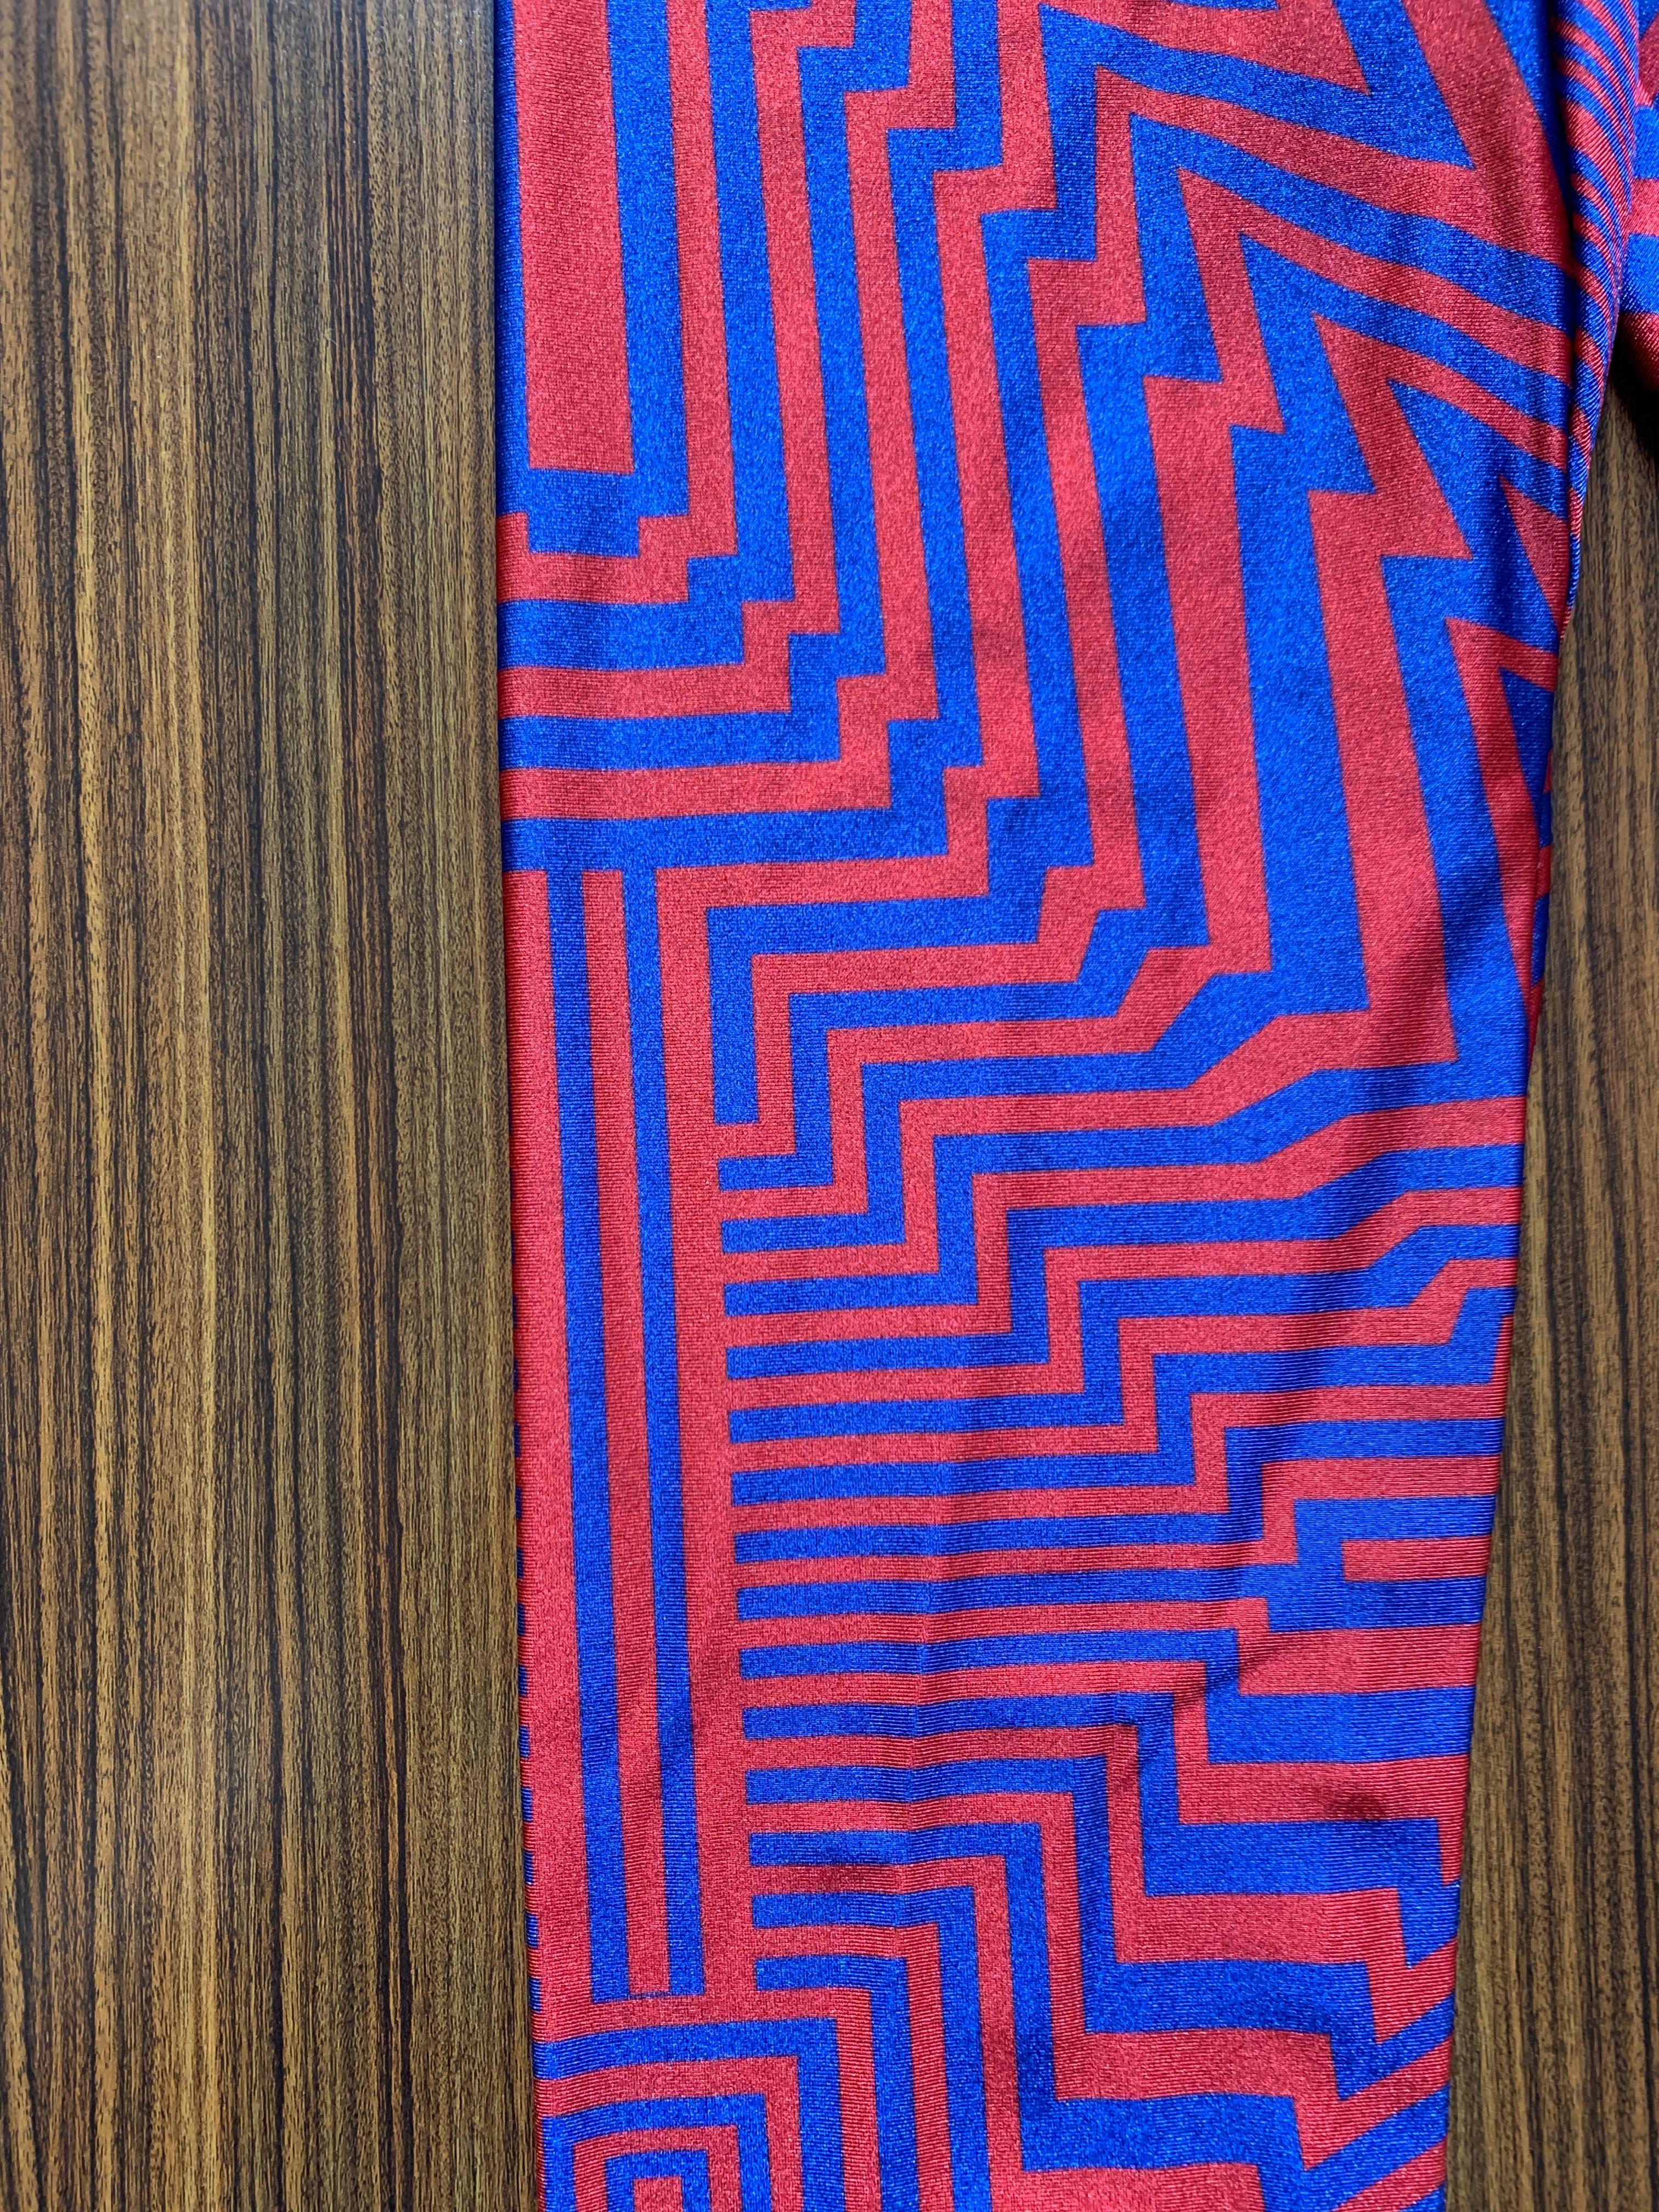 Alexander McQueen 2010 Red and Blue Geometric Print Legging Leggings In Good Condition For Sale In San Francisco, CA